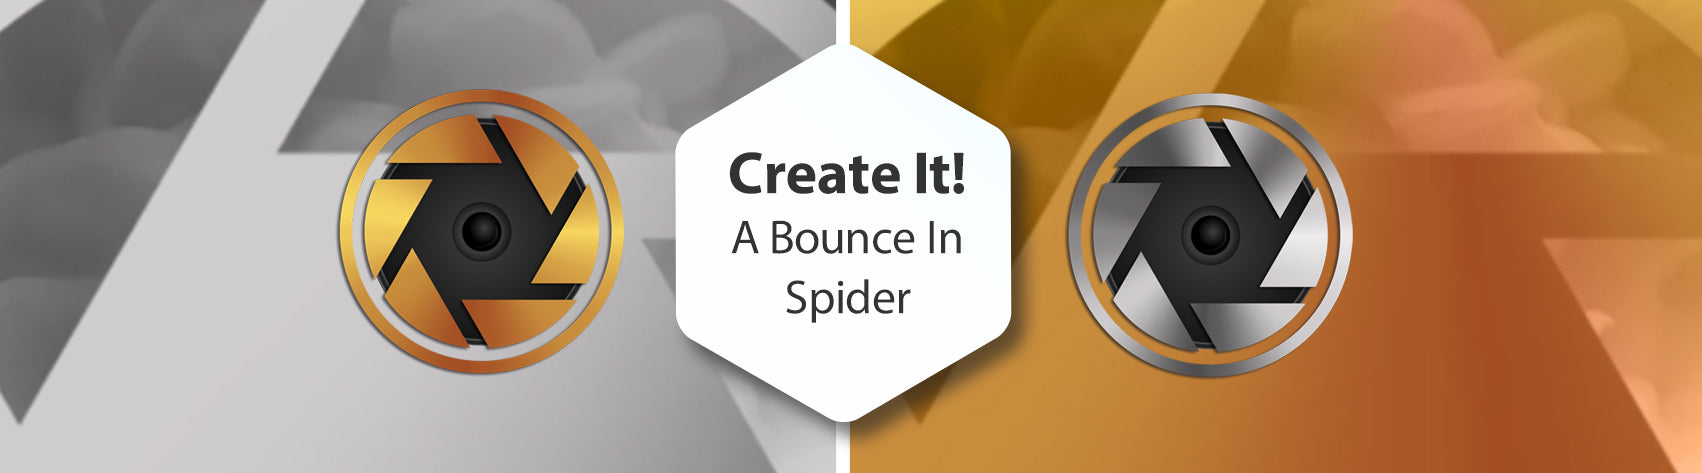 Create It! A Bounce In Spider